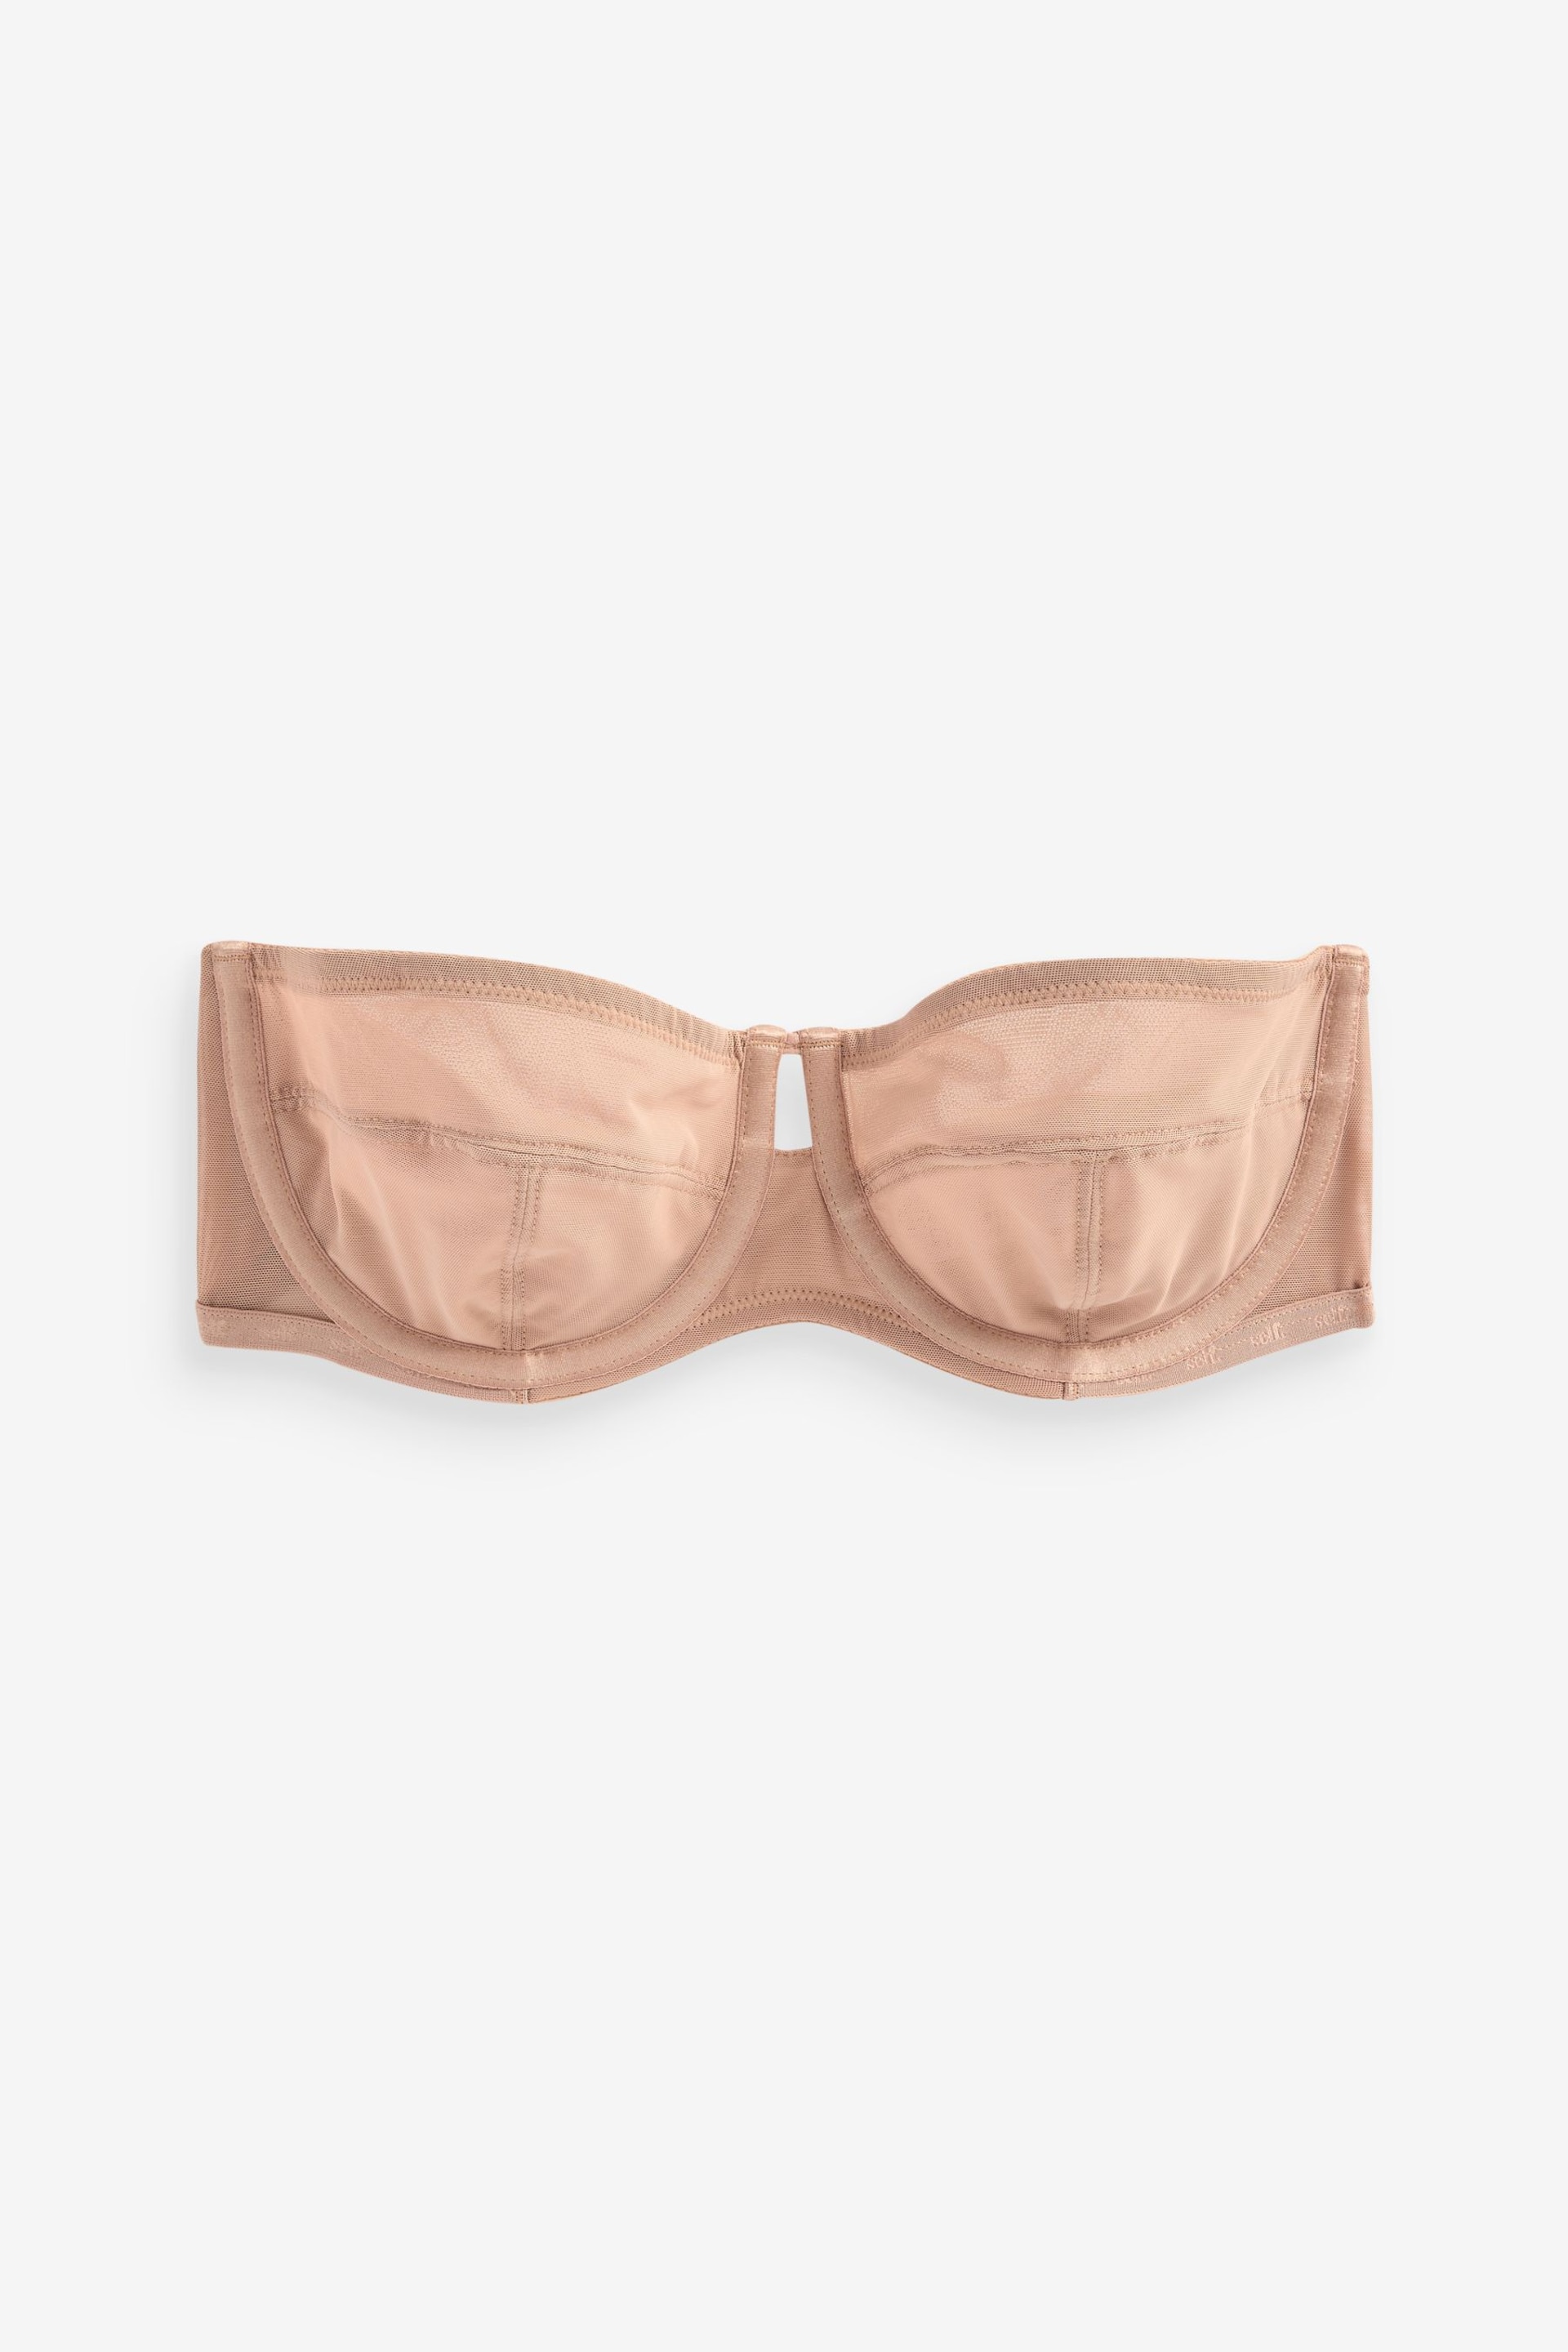 self. Almond Non Pad Wired Strapless Mesh Bra - Image 7 of 8